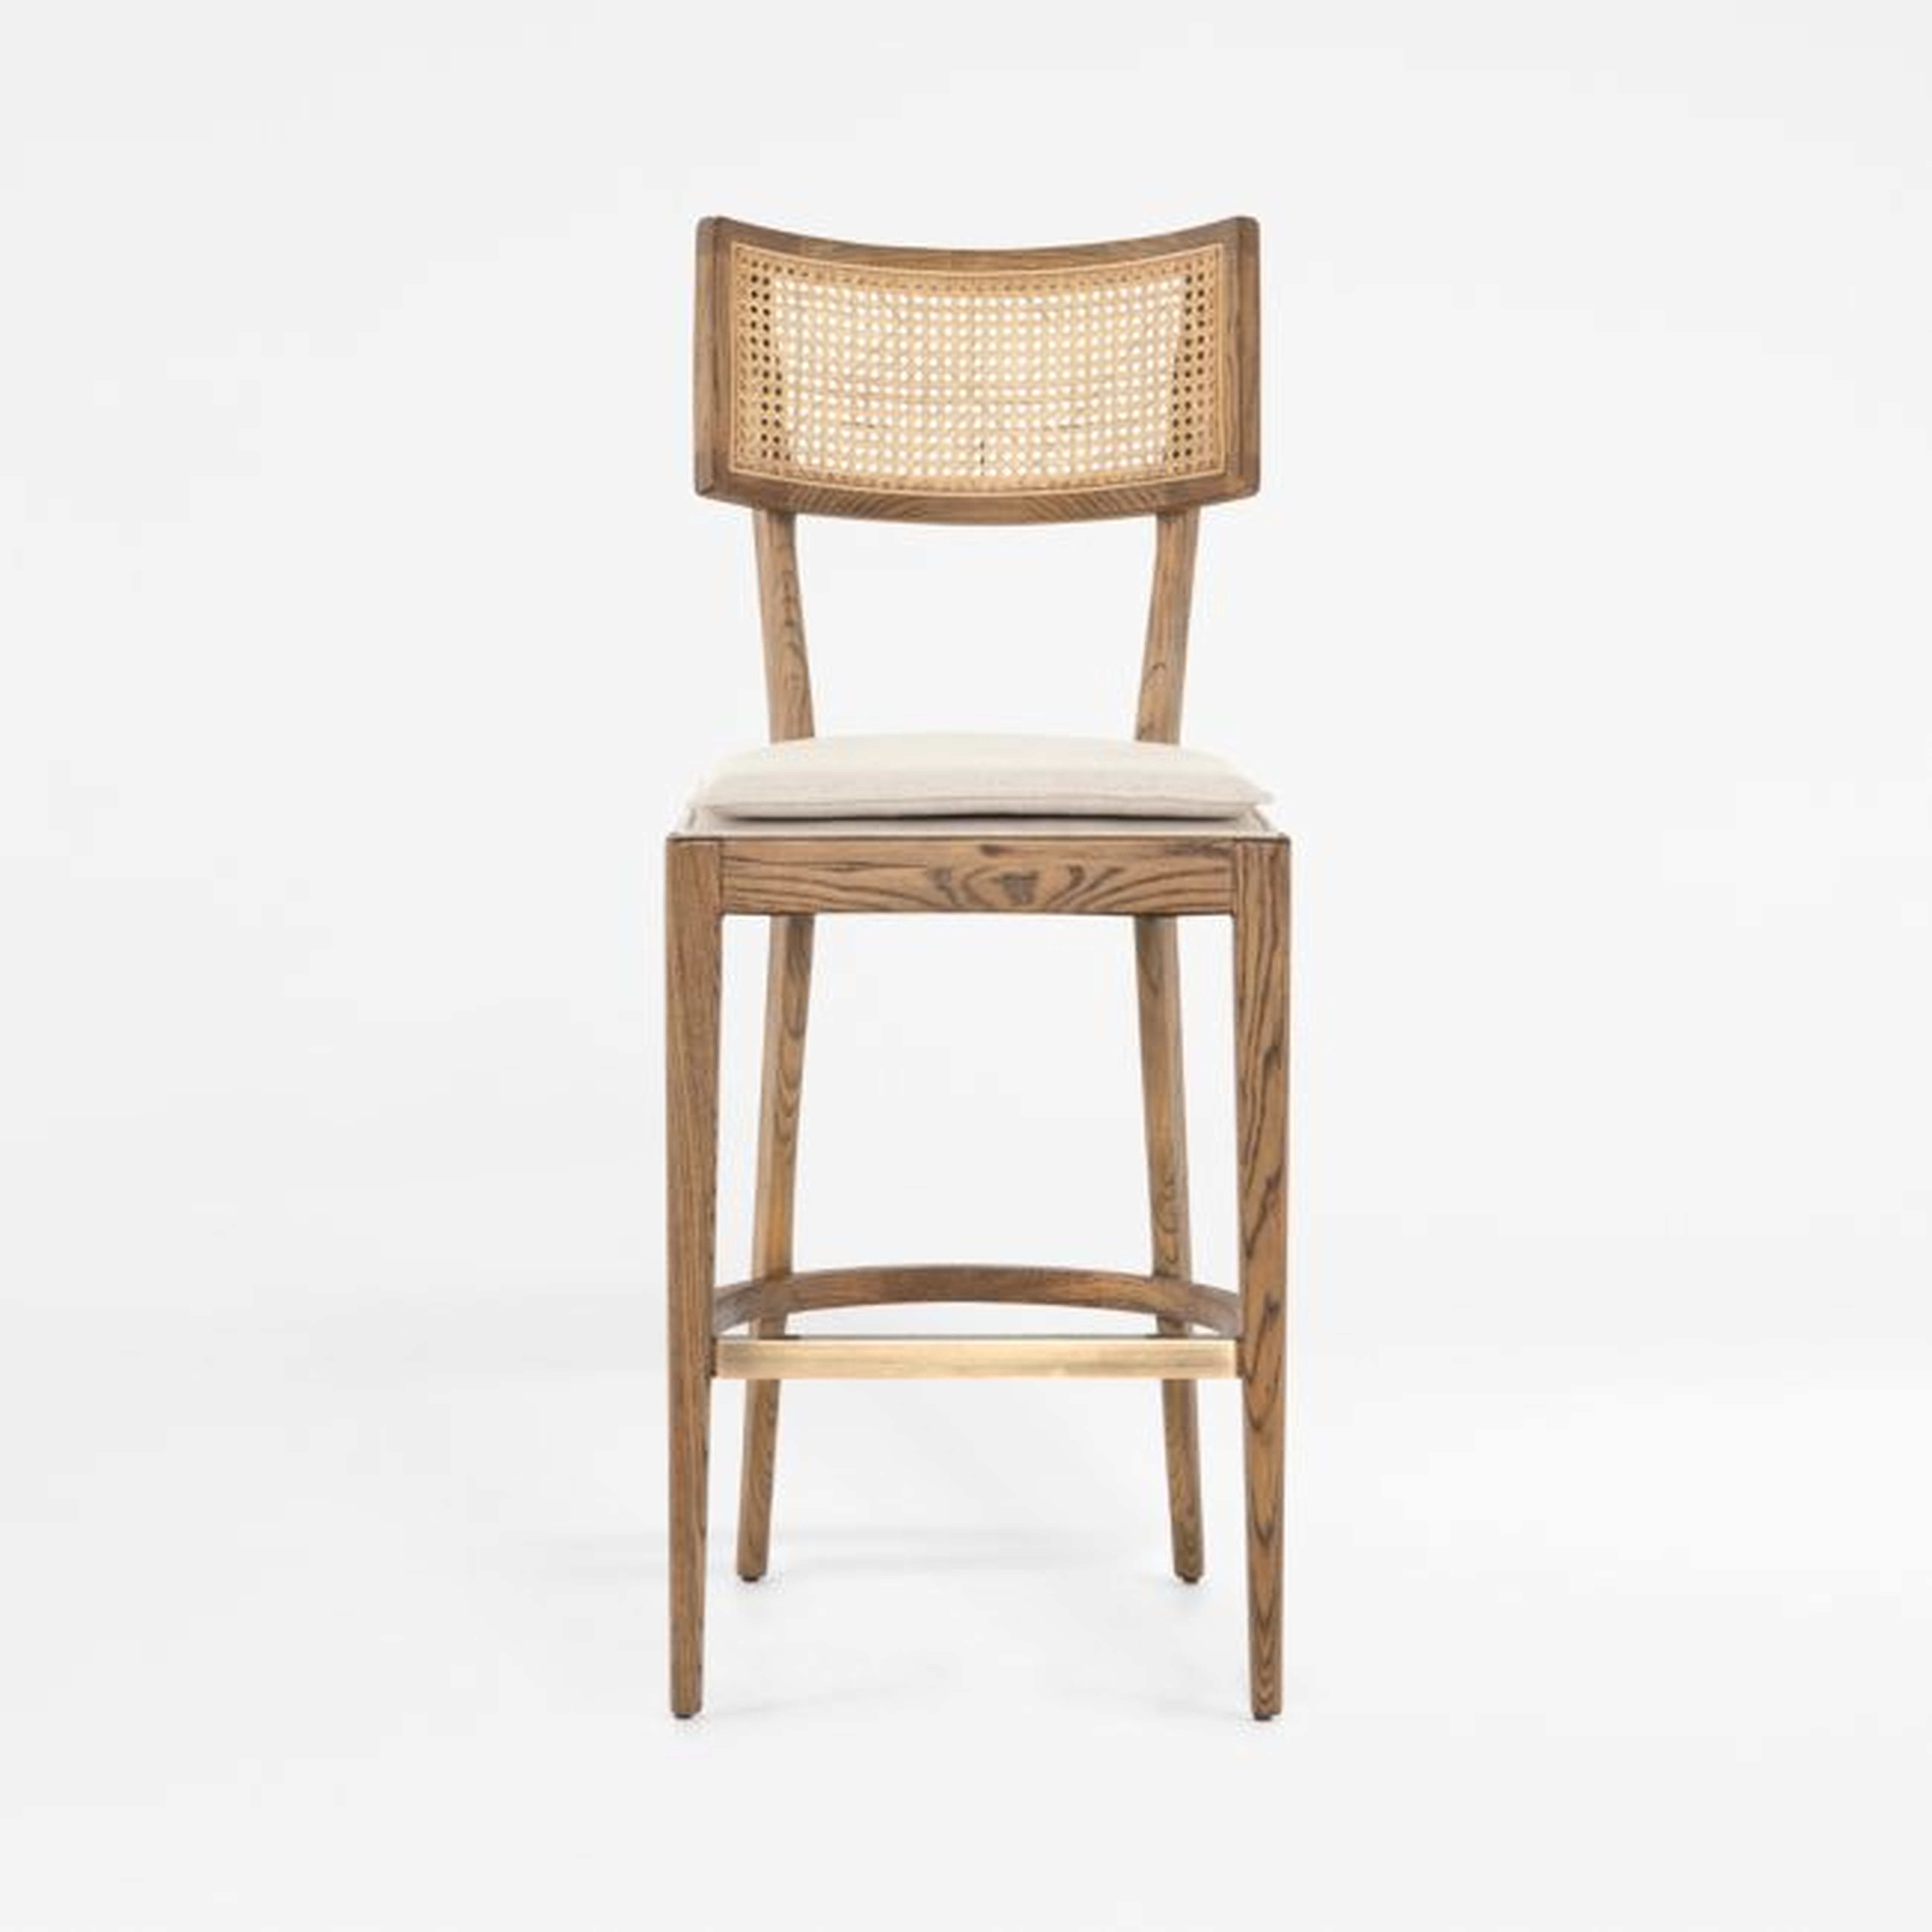 Libby Cane Counter Stool, Natural - Crate and Barrel